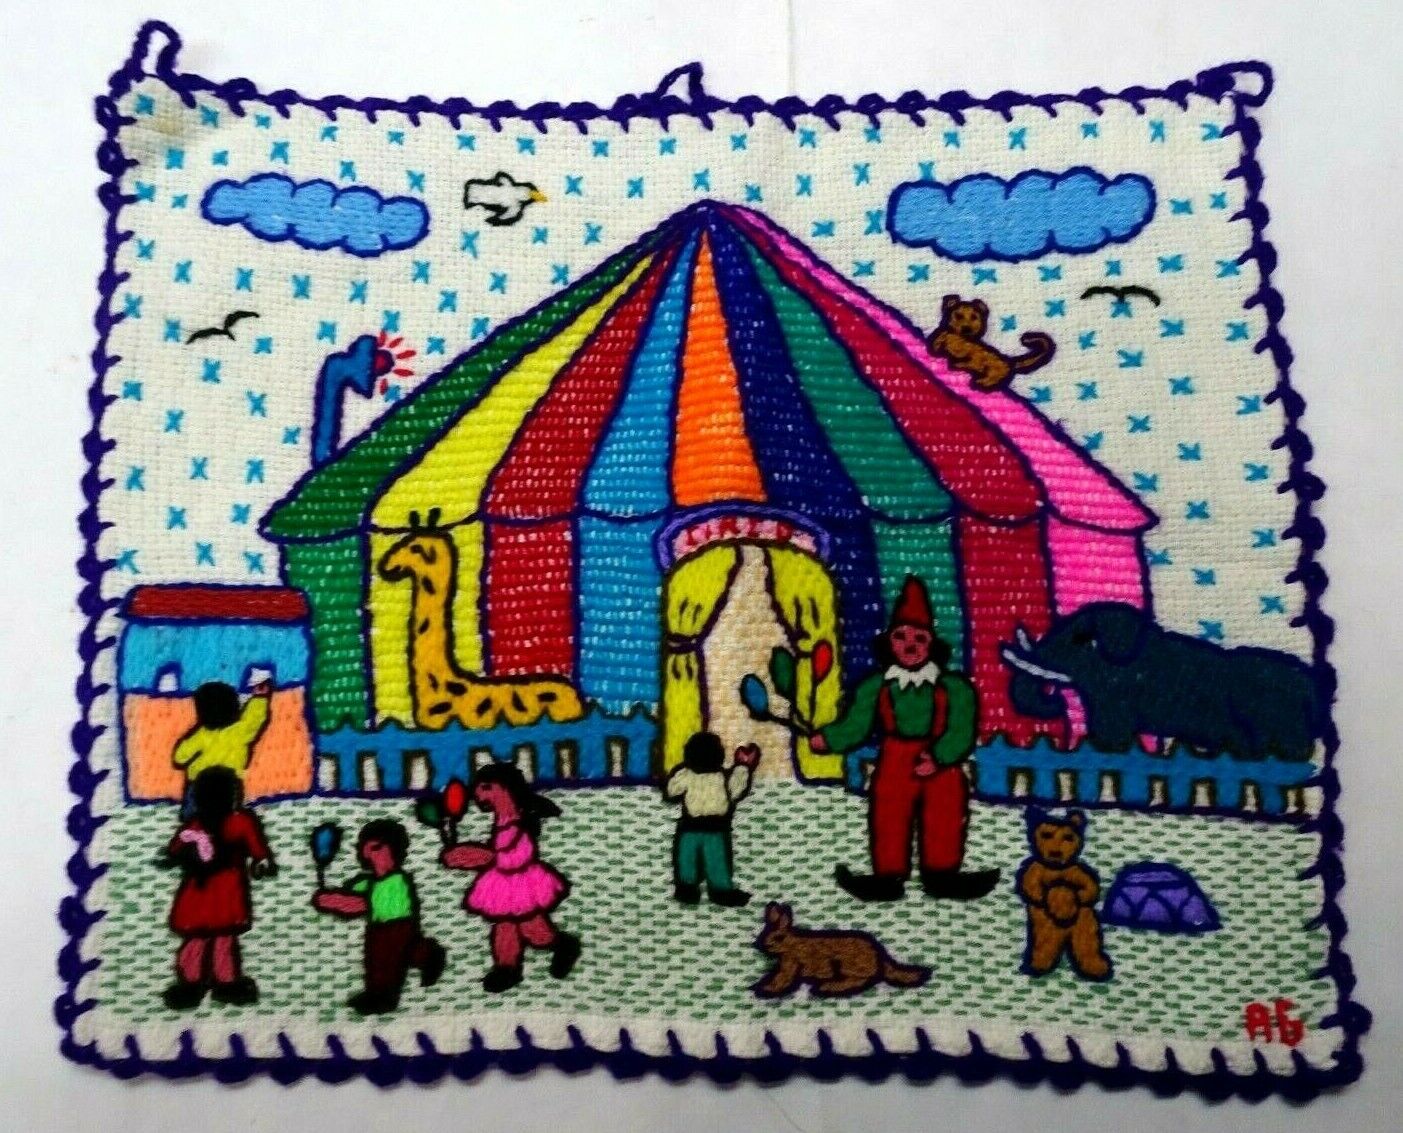 Vintage Souvenir Mariposa Made in Peru 1 X 14.5" Wall Tapestry Circus Tent Scene